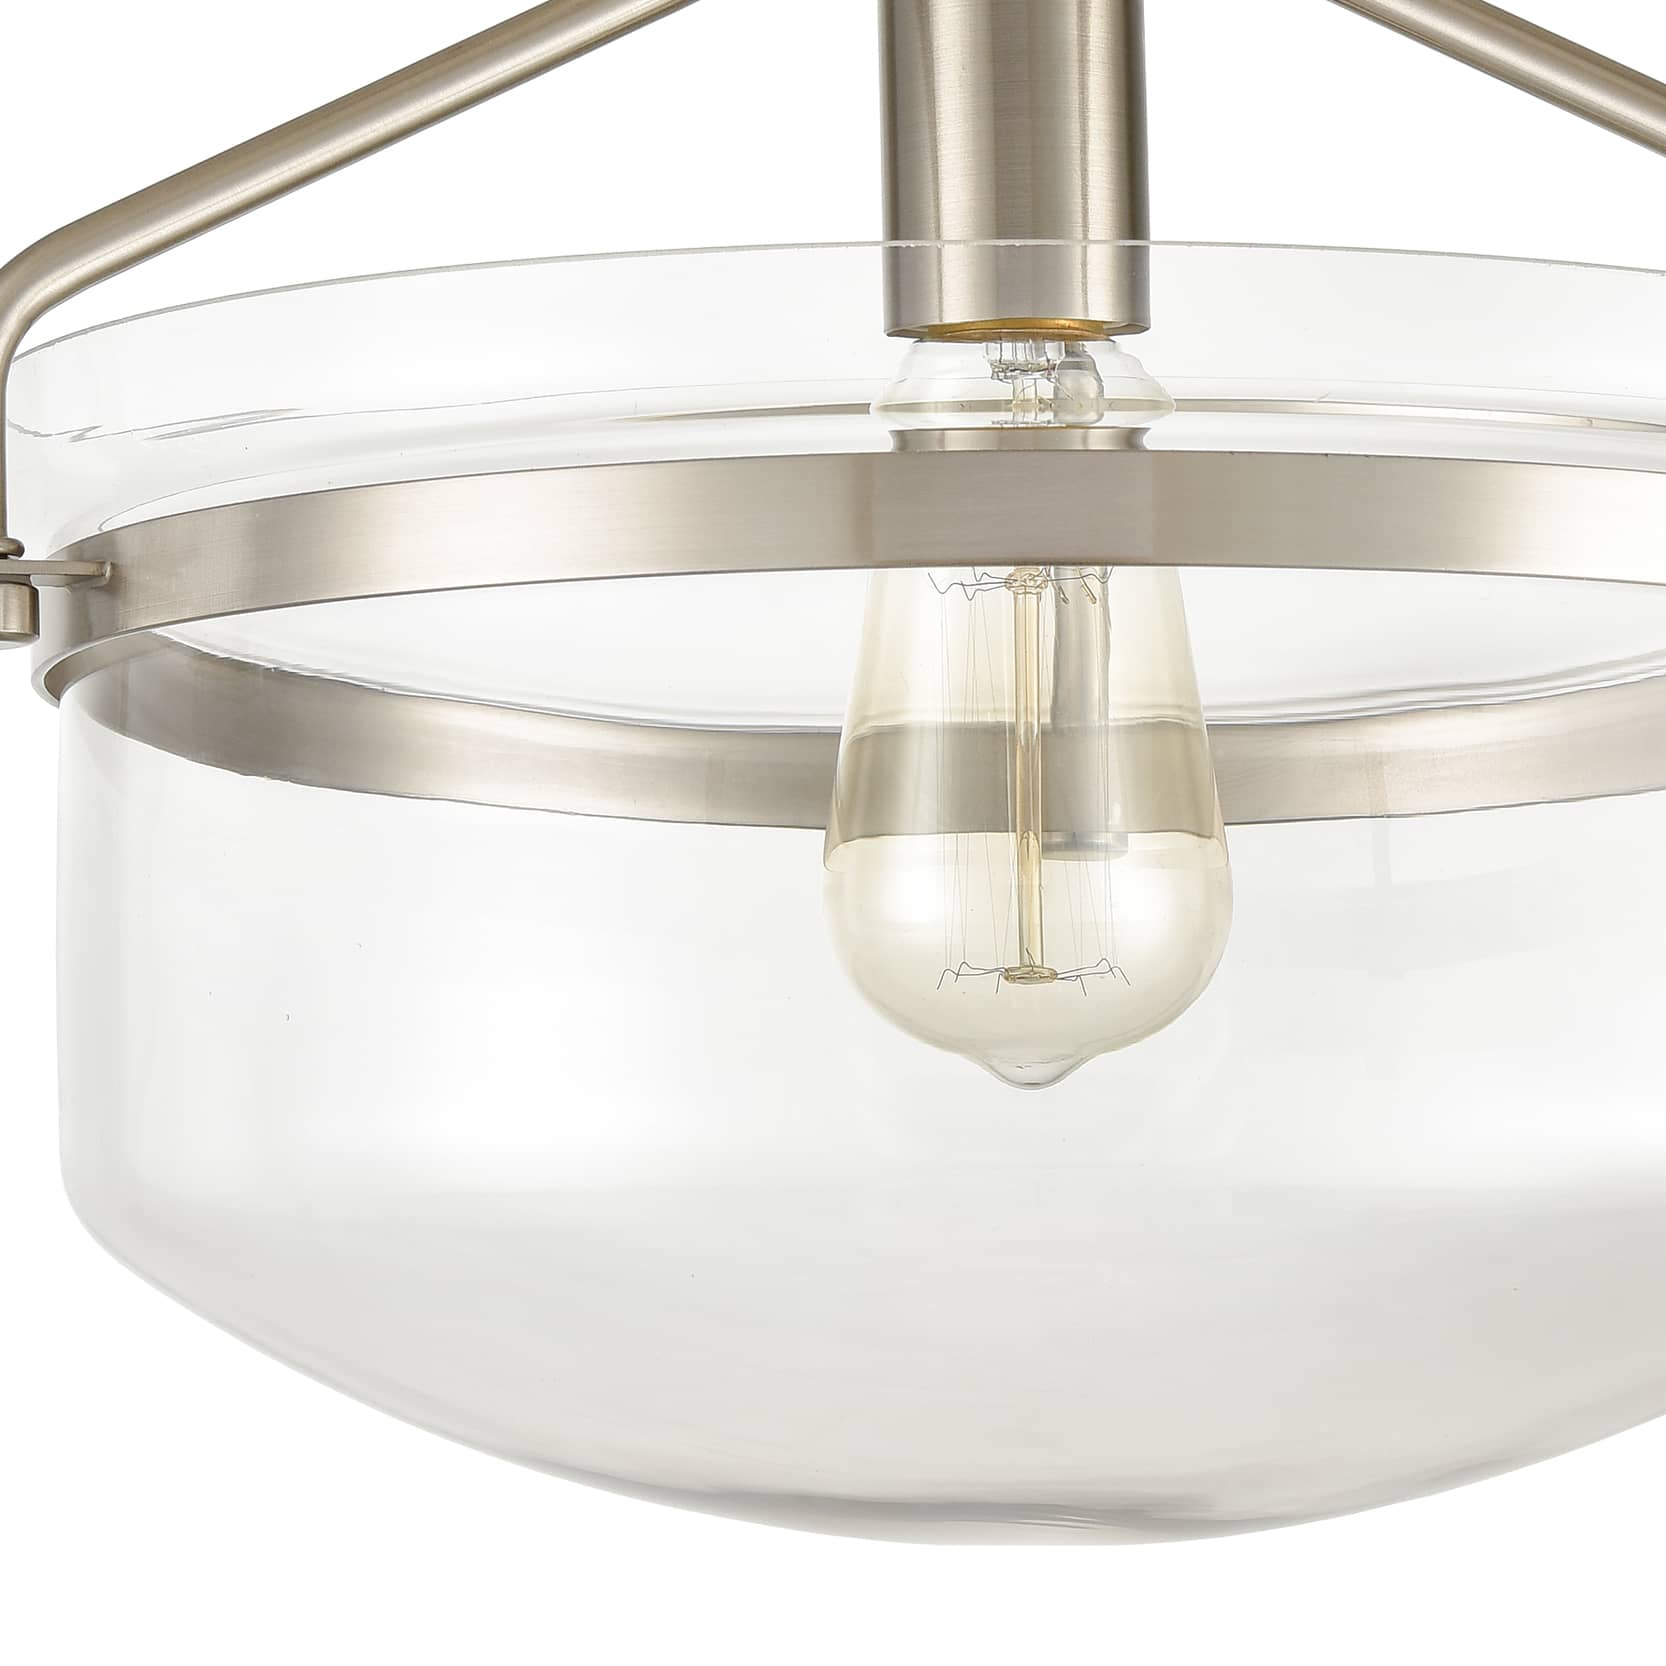 Brushed Nickel Semi-flush Mount Ceiling Light Glass Dome Shade